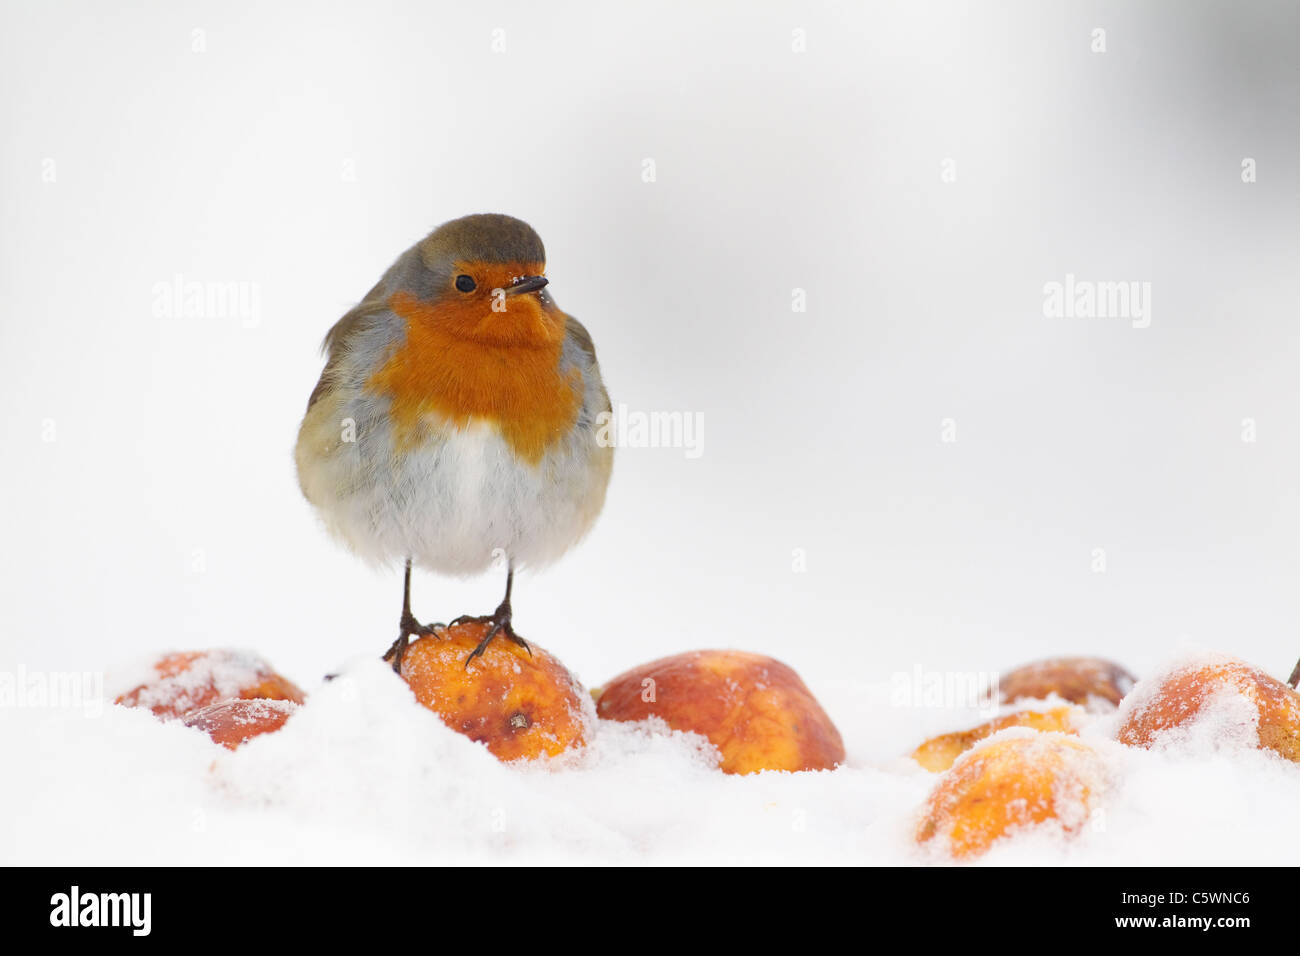 Robin (Erithacus rubecula), adult perched on apple in snow. Stock Photo